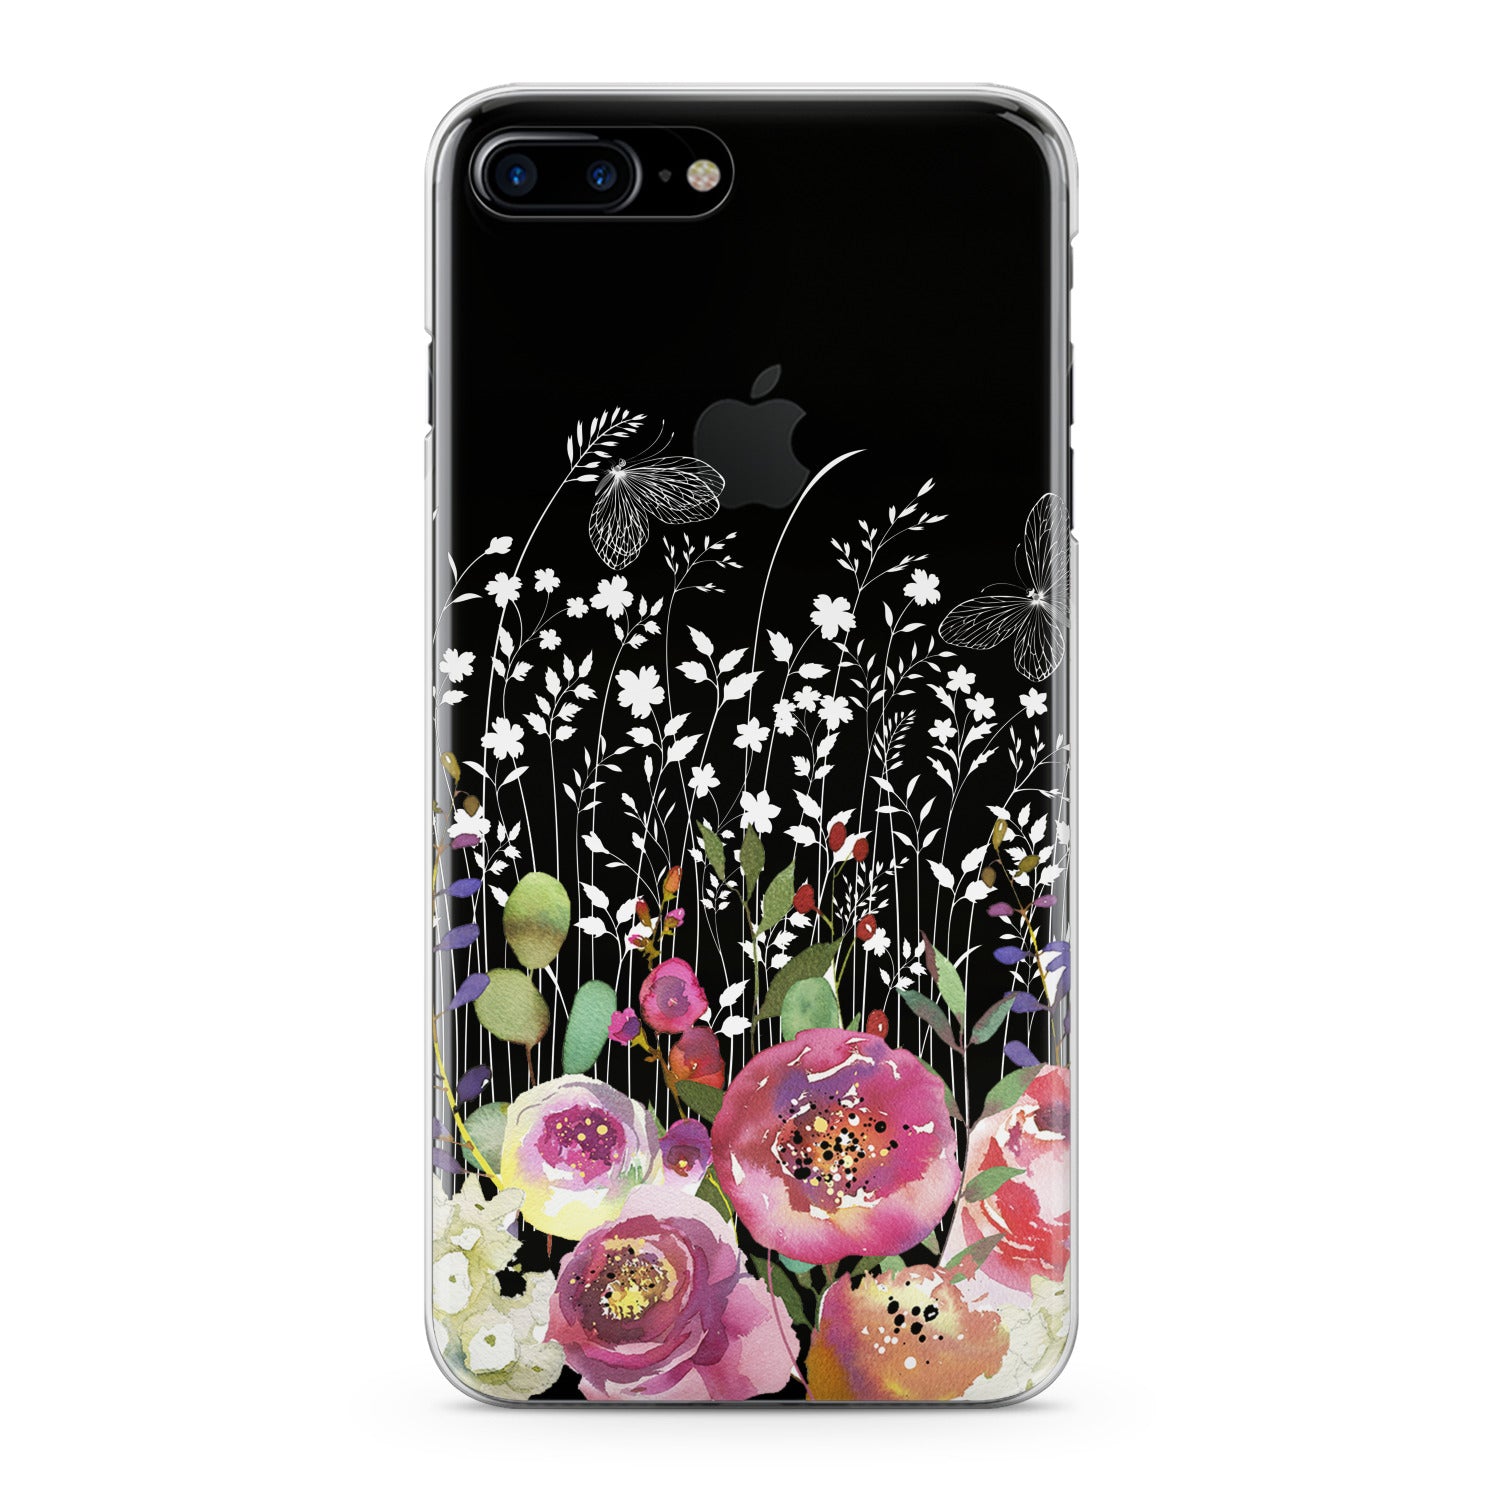 Lex Altern Garden Flowers Phone Case for your iPhone & Android phone.